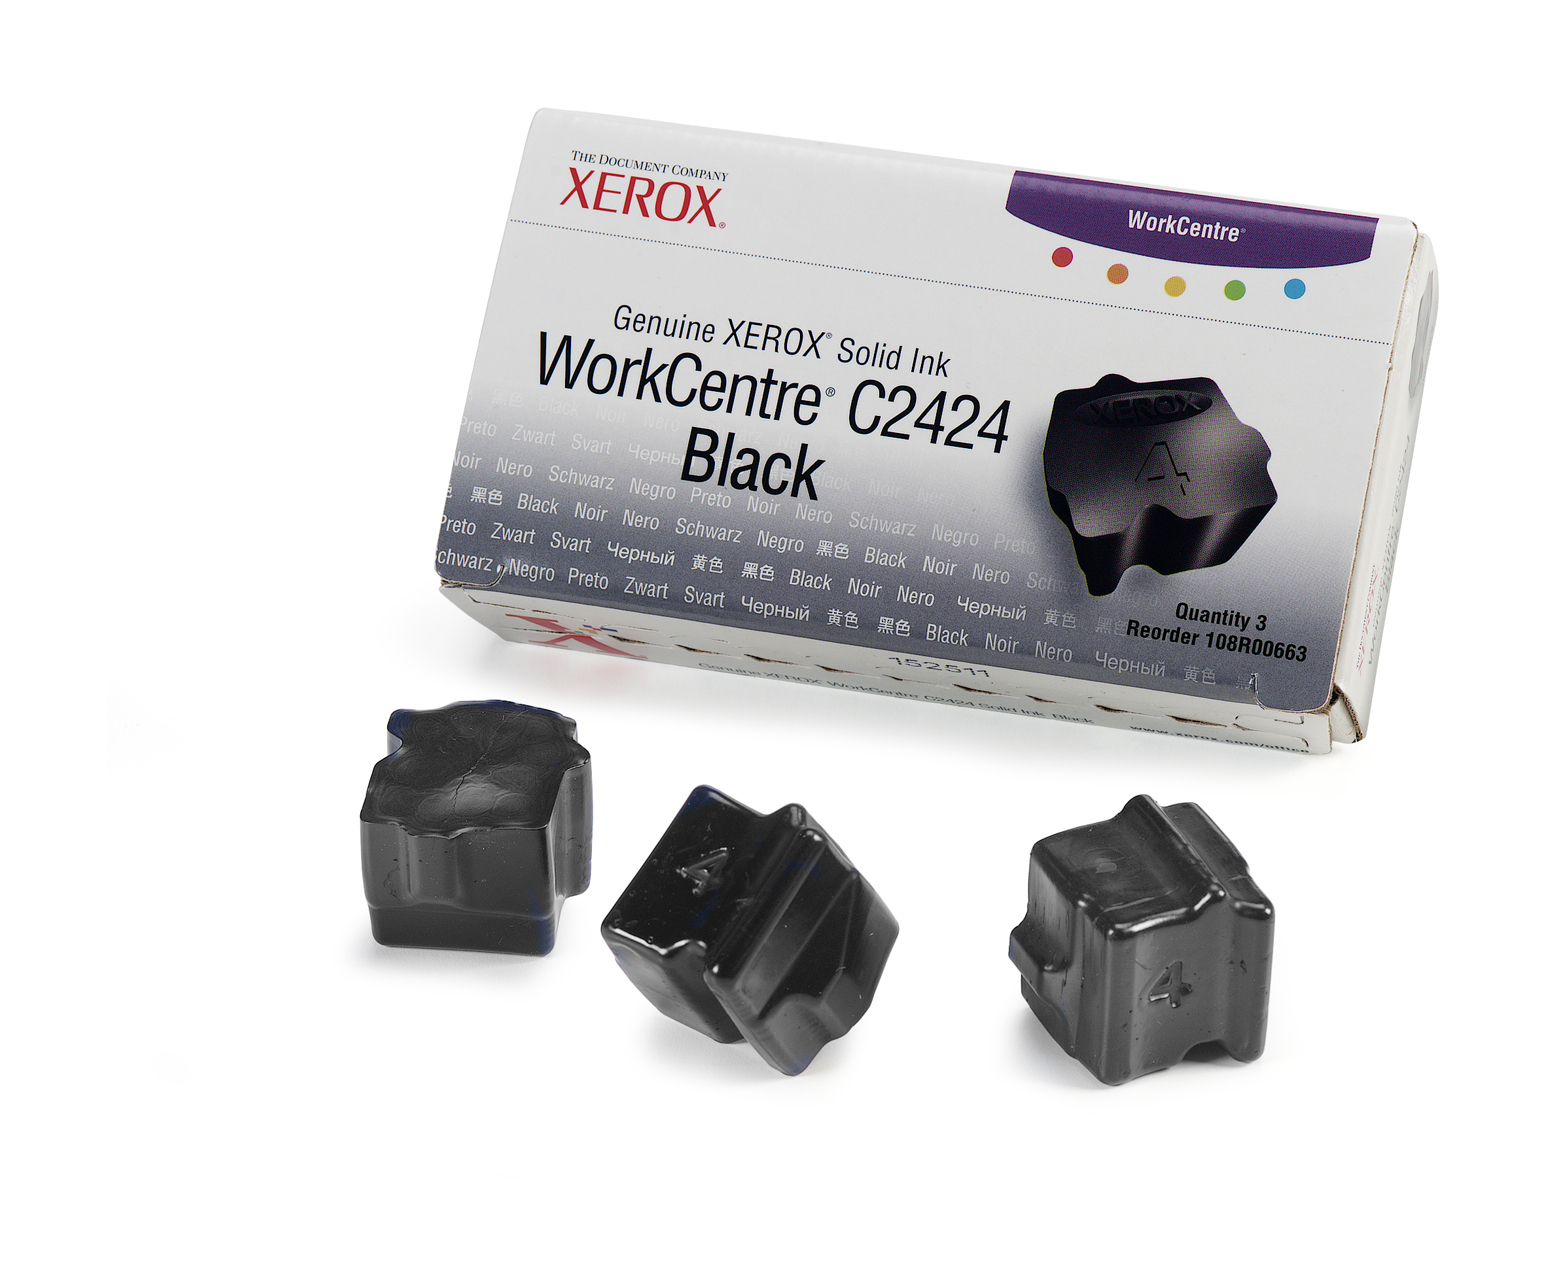 Xerox Solid Ink Black (3 sticks) for WorkCentre C2424